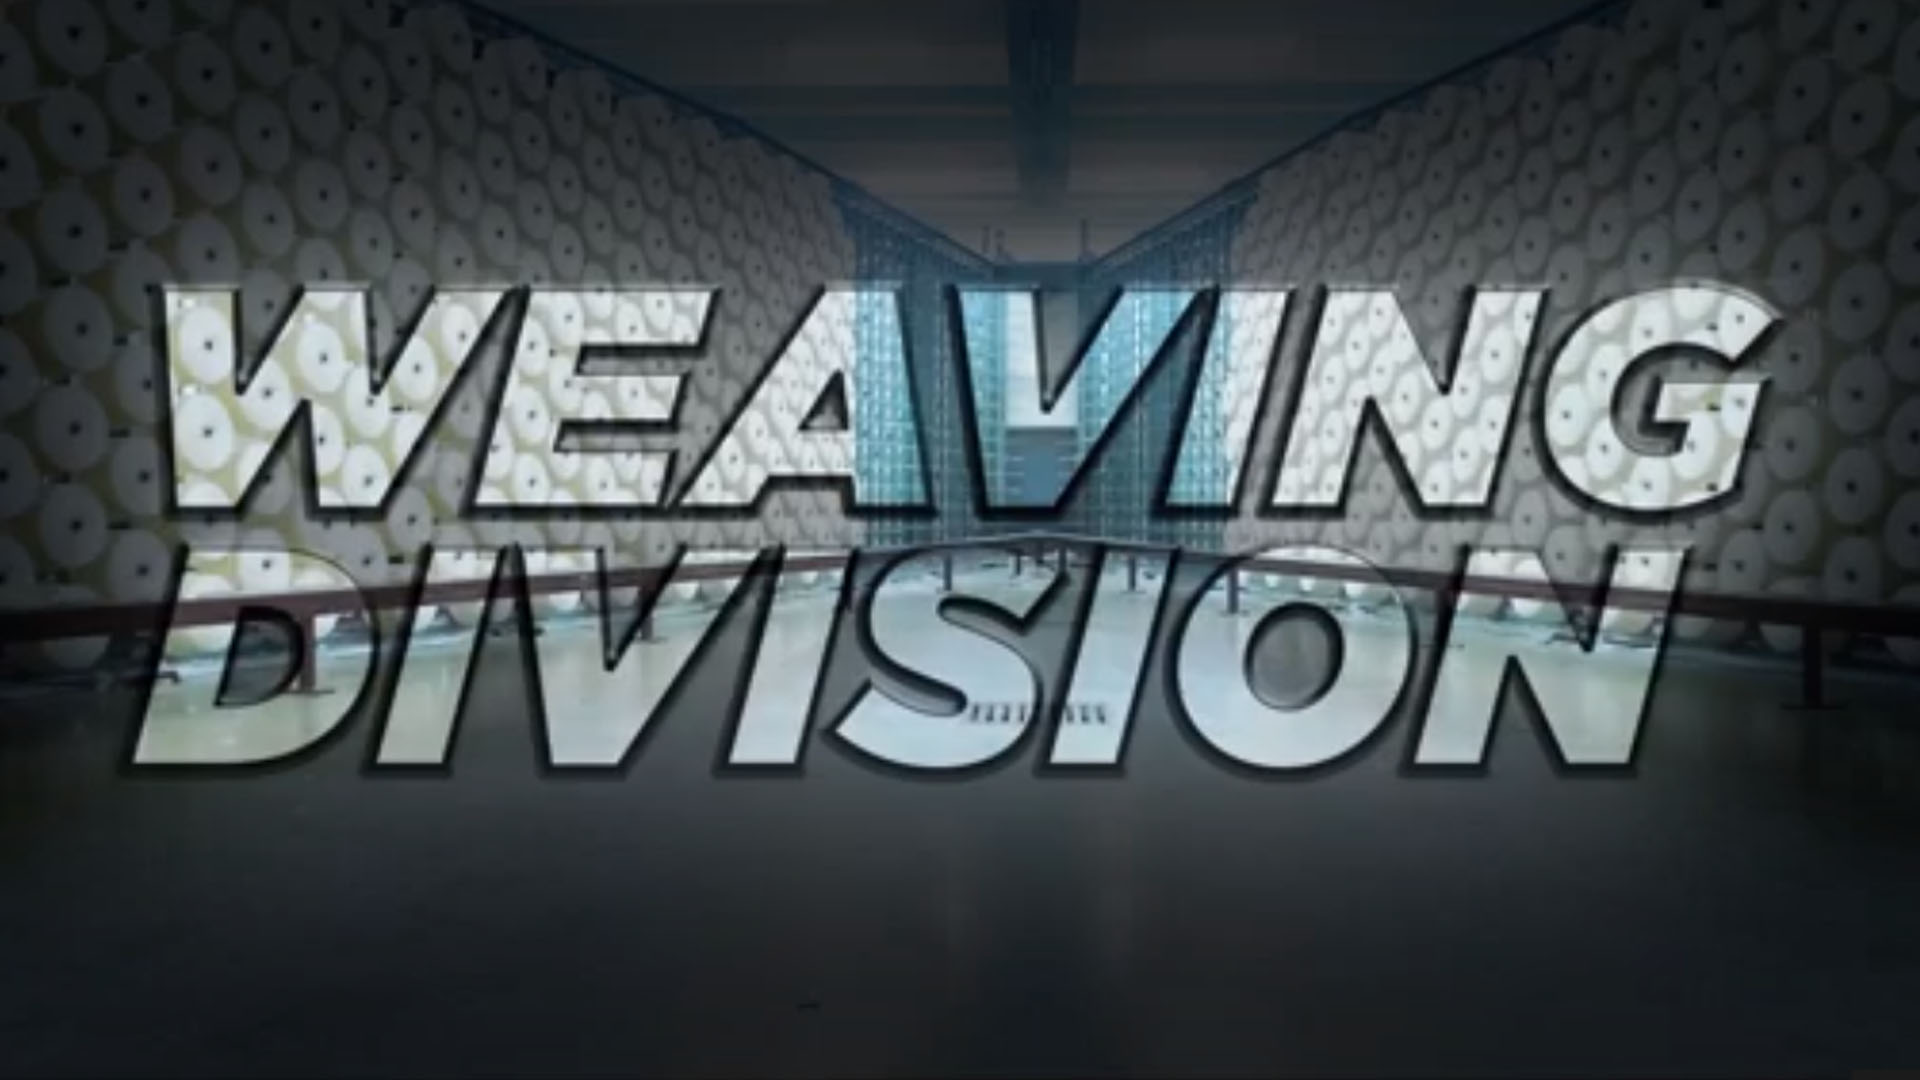 Weaving Division